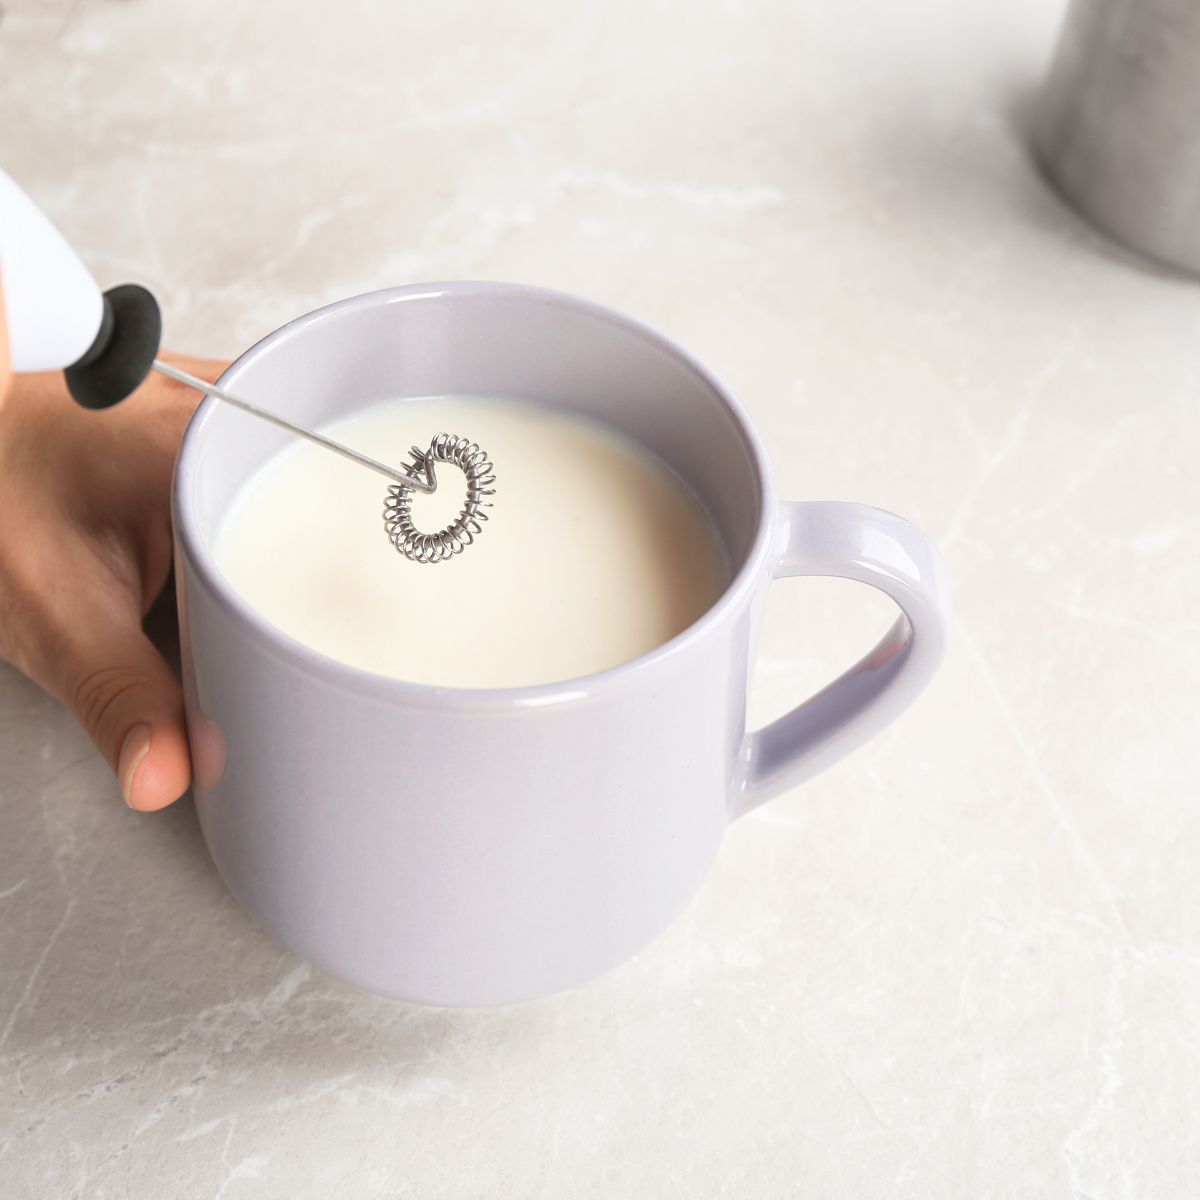 Milk in a white mug with a milk frother